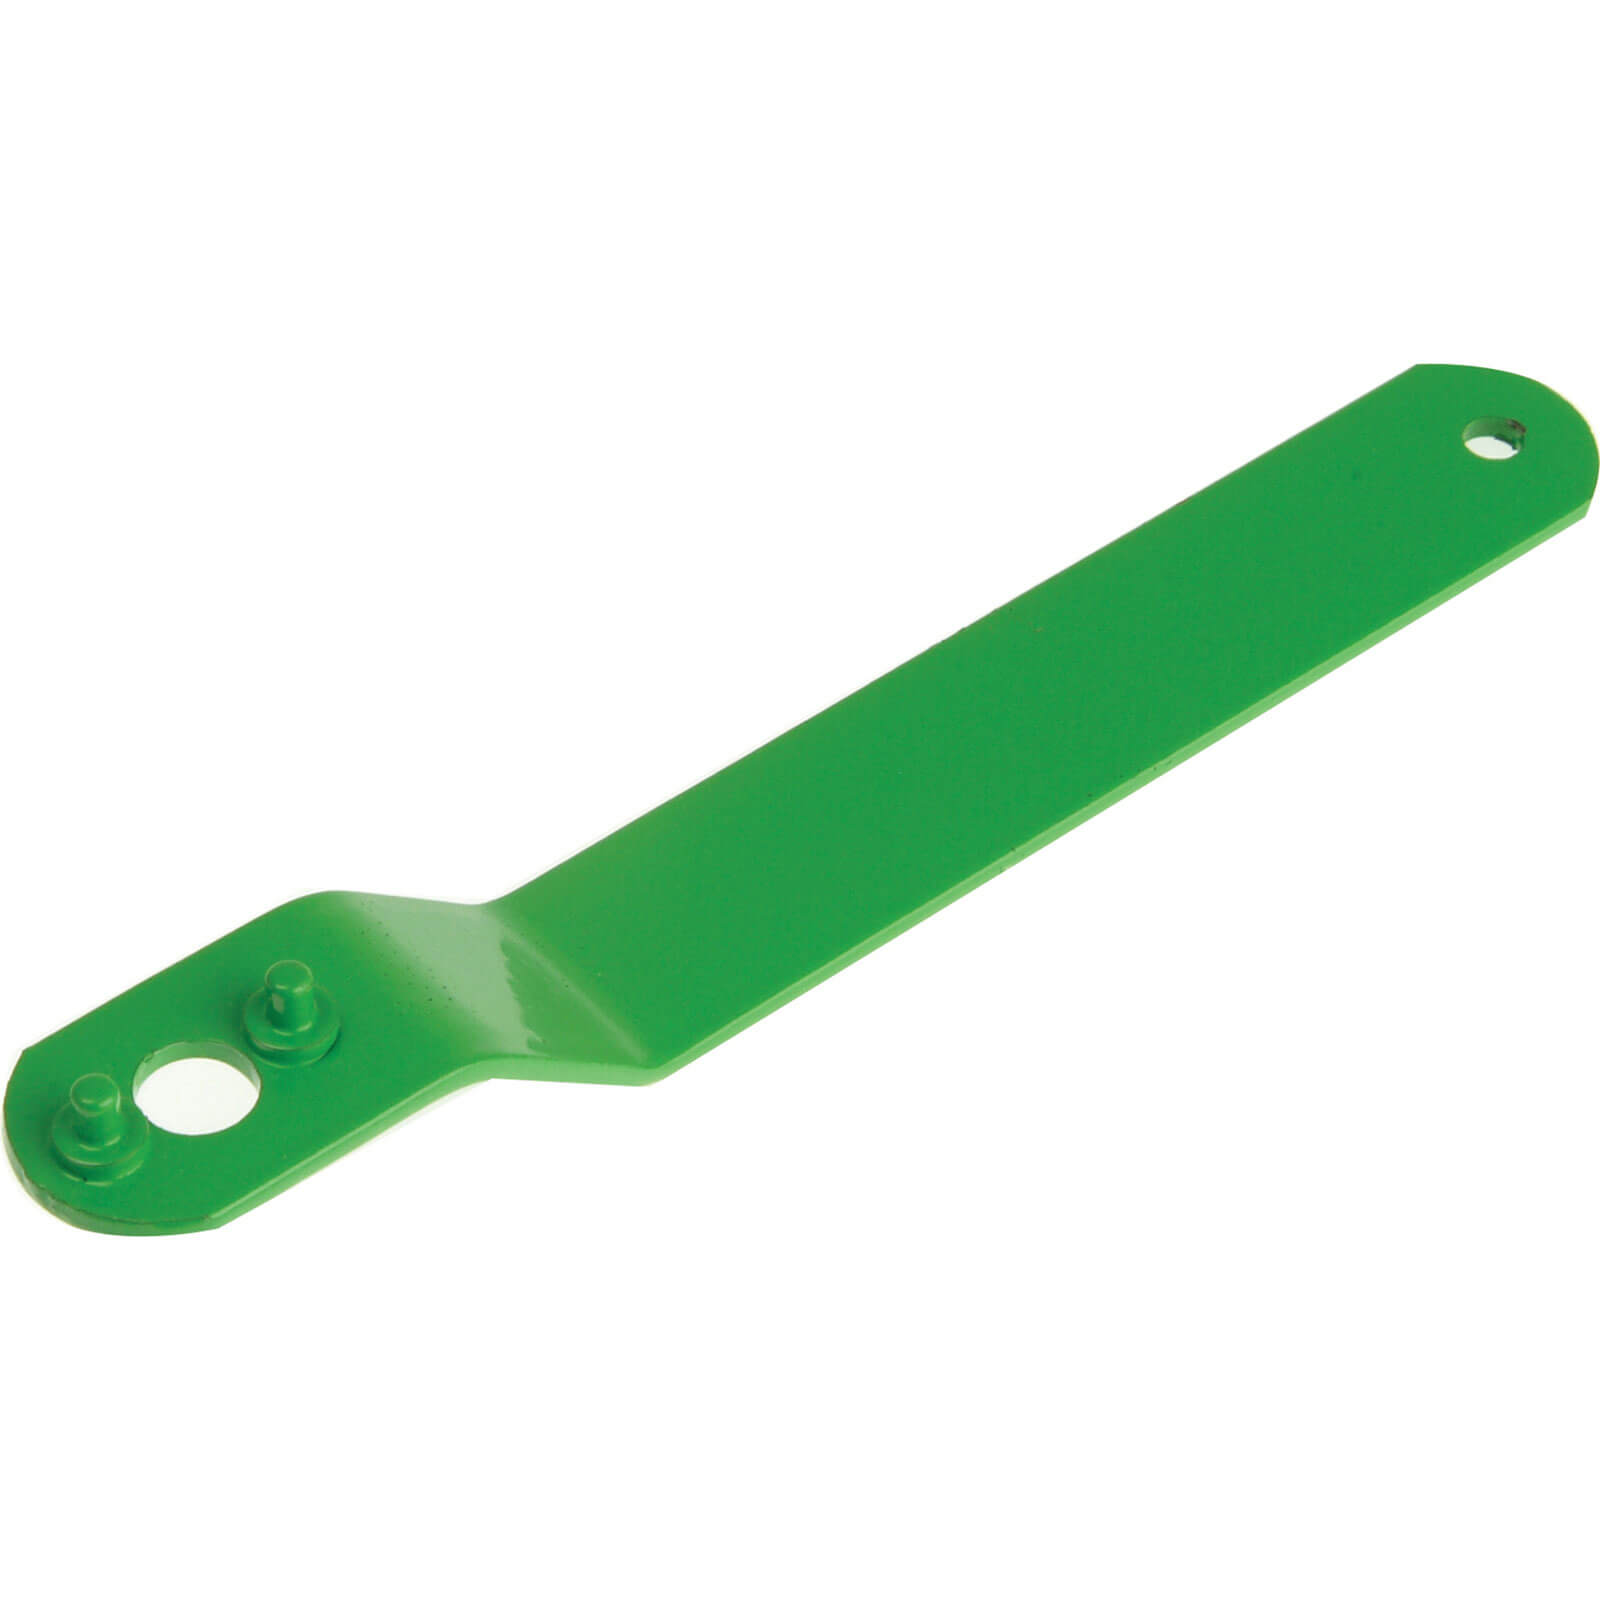 Image of Flexipads 20-4 Green Angle Grinder Pin Spanner